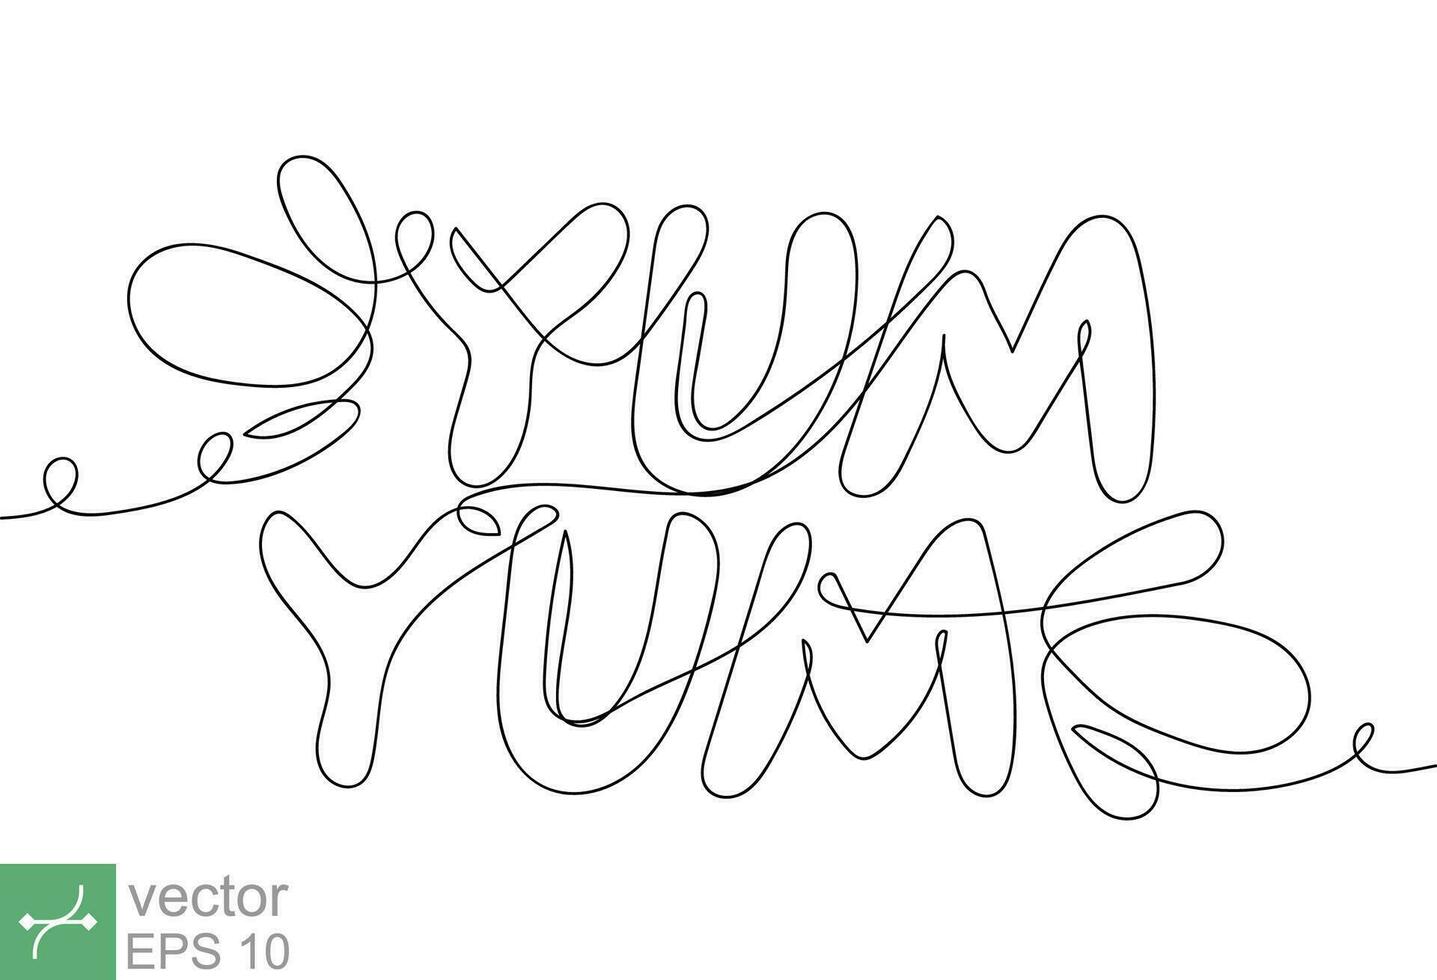 Yum yum text icon. Yummy tasty food design doodle logo text. Printable graphic tee. Continuous line art drawing. Vector illustration EPS 10.